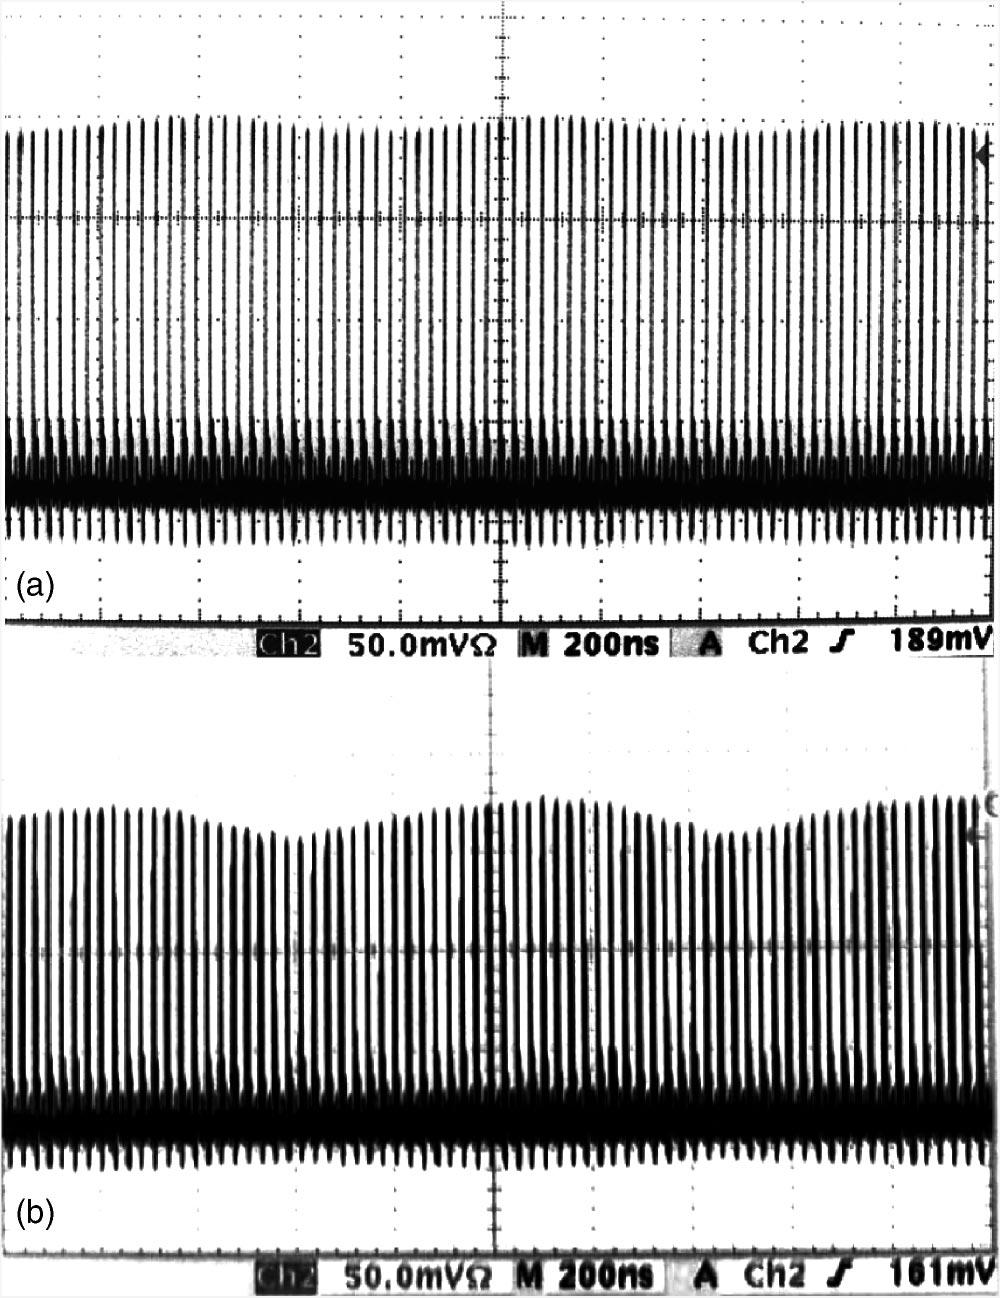 BIFURCATIONS AND MULTIPLE-PERIOD SOLITON PHYSICAL REVIEW E 70, 066612 (2004) FIG. 14. Two examples of long period pulsations.